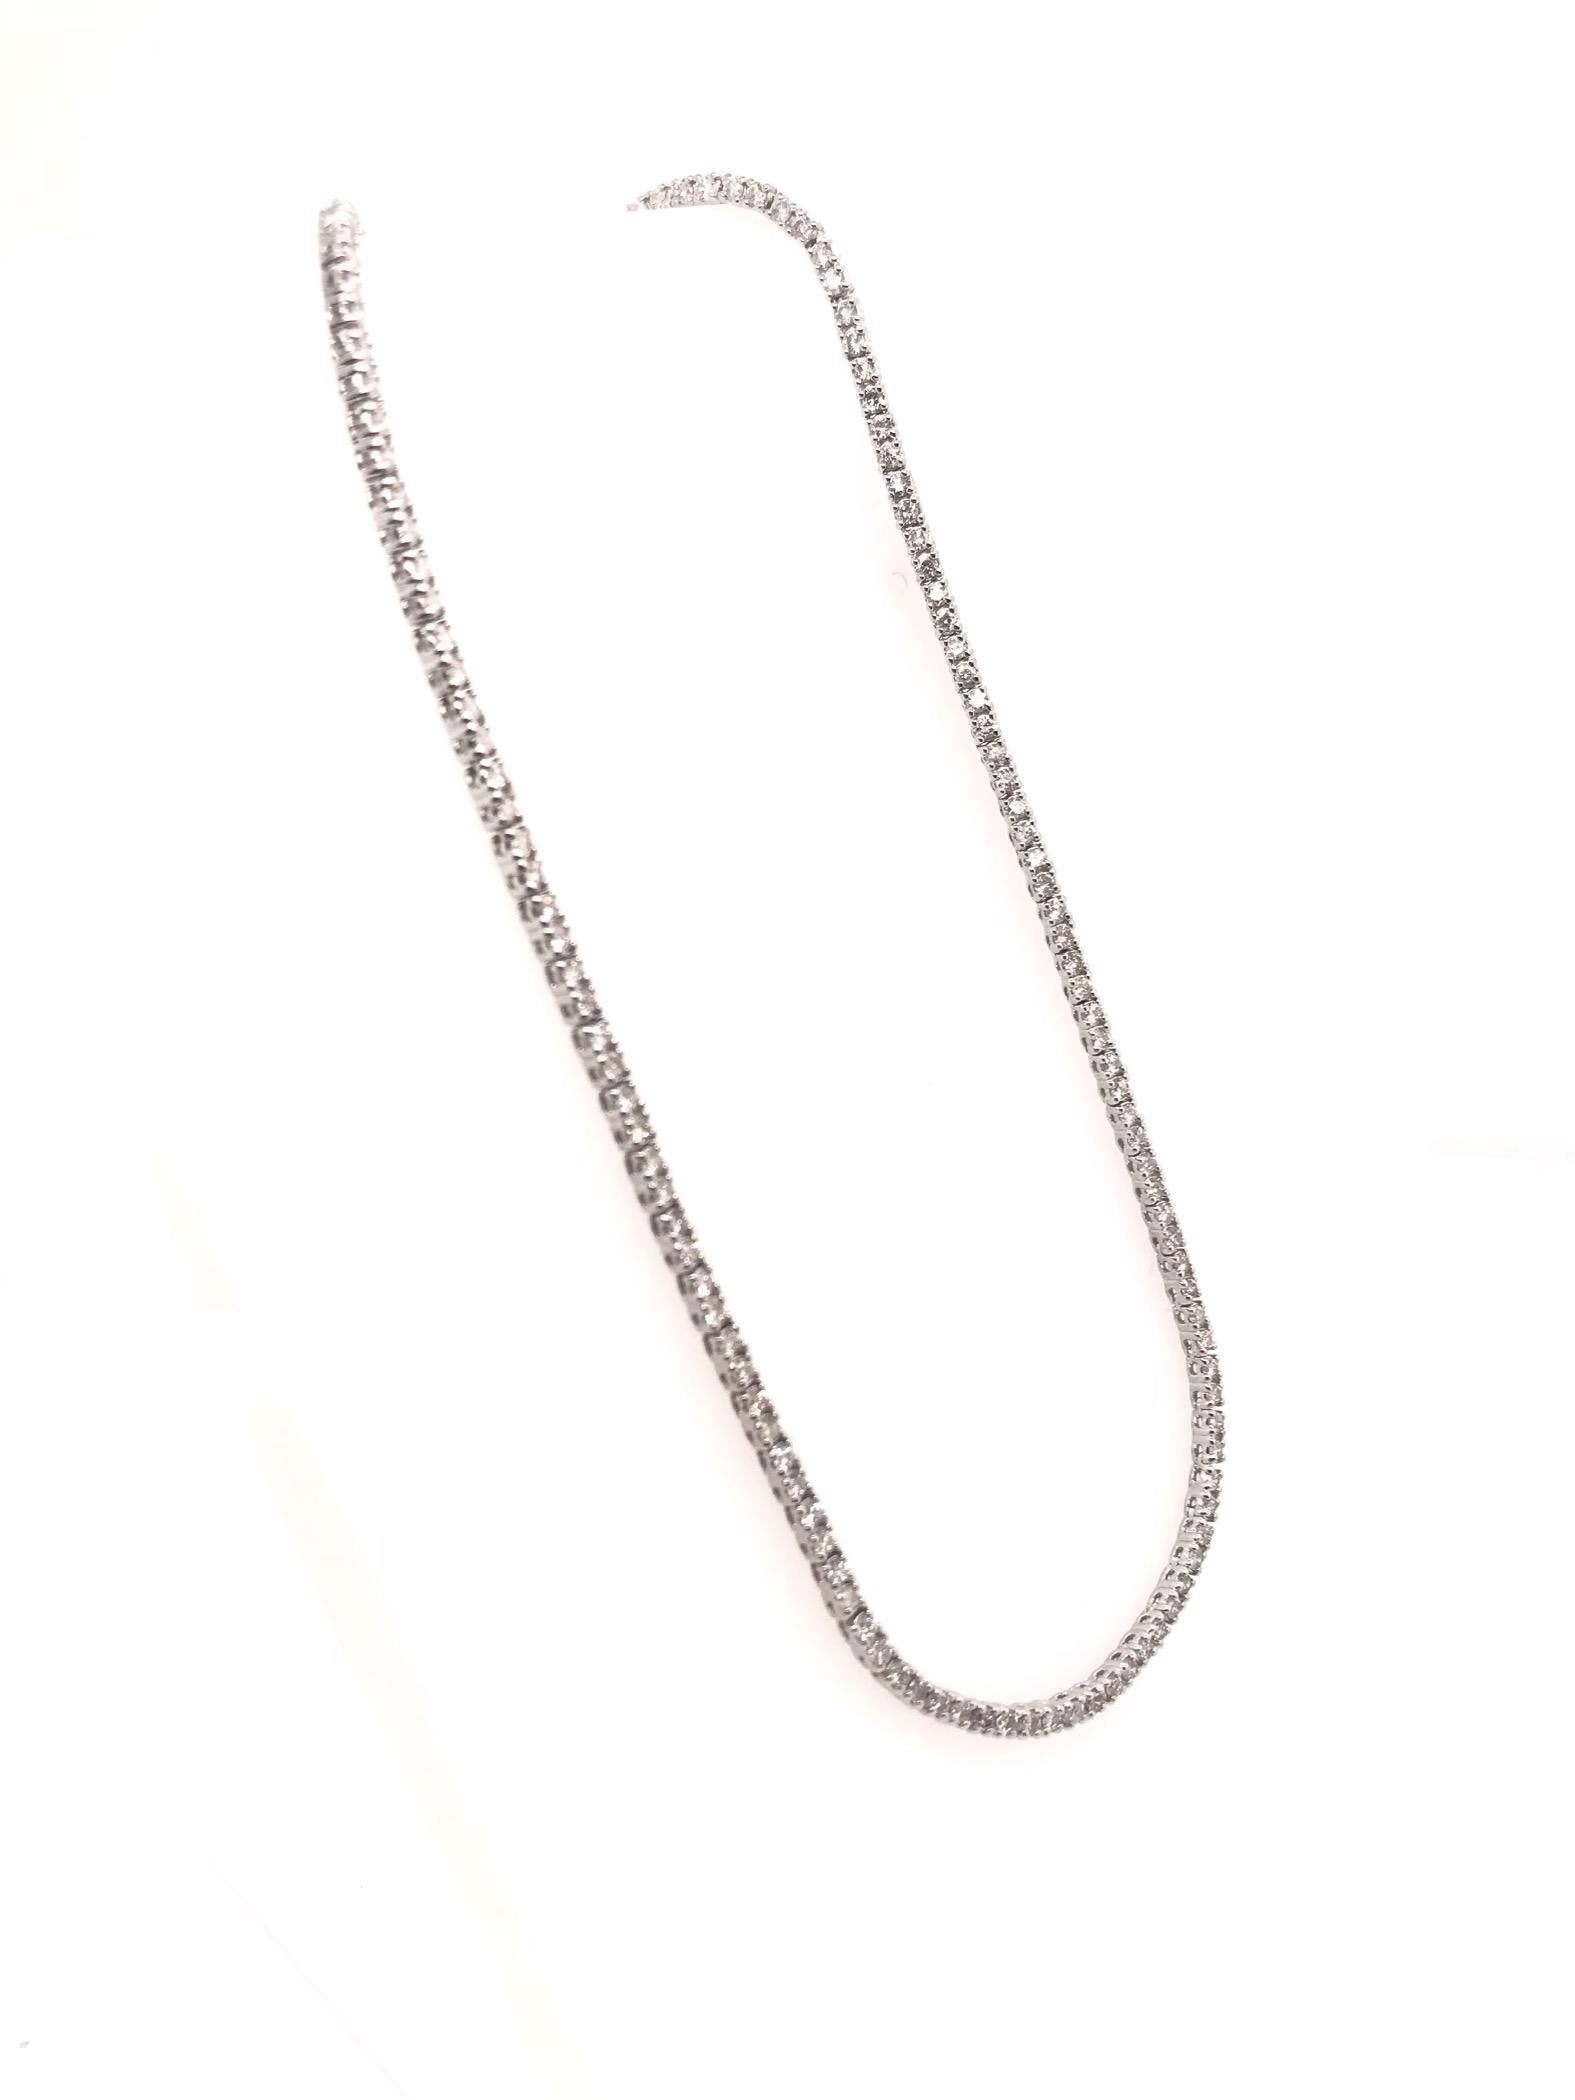 This contemporary diamond necklace features approximately 4.40 carats of diamonds. This simply sparkling diamond style is perfect for layering. We suggest pairing it with your gold pieces to bring a more curated style into your everyday jewelry